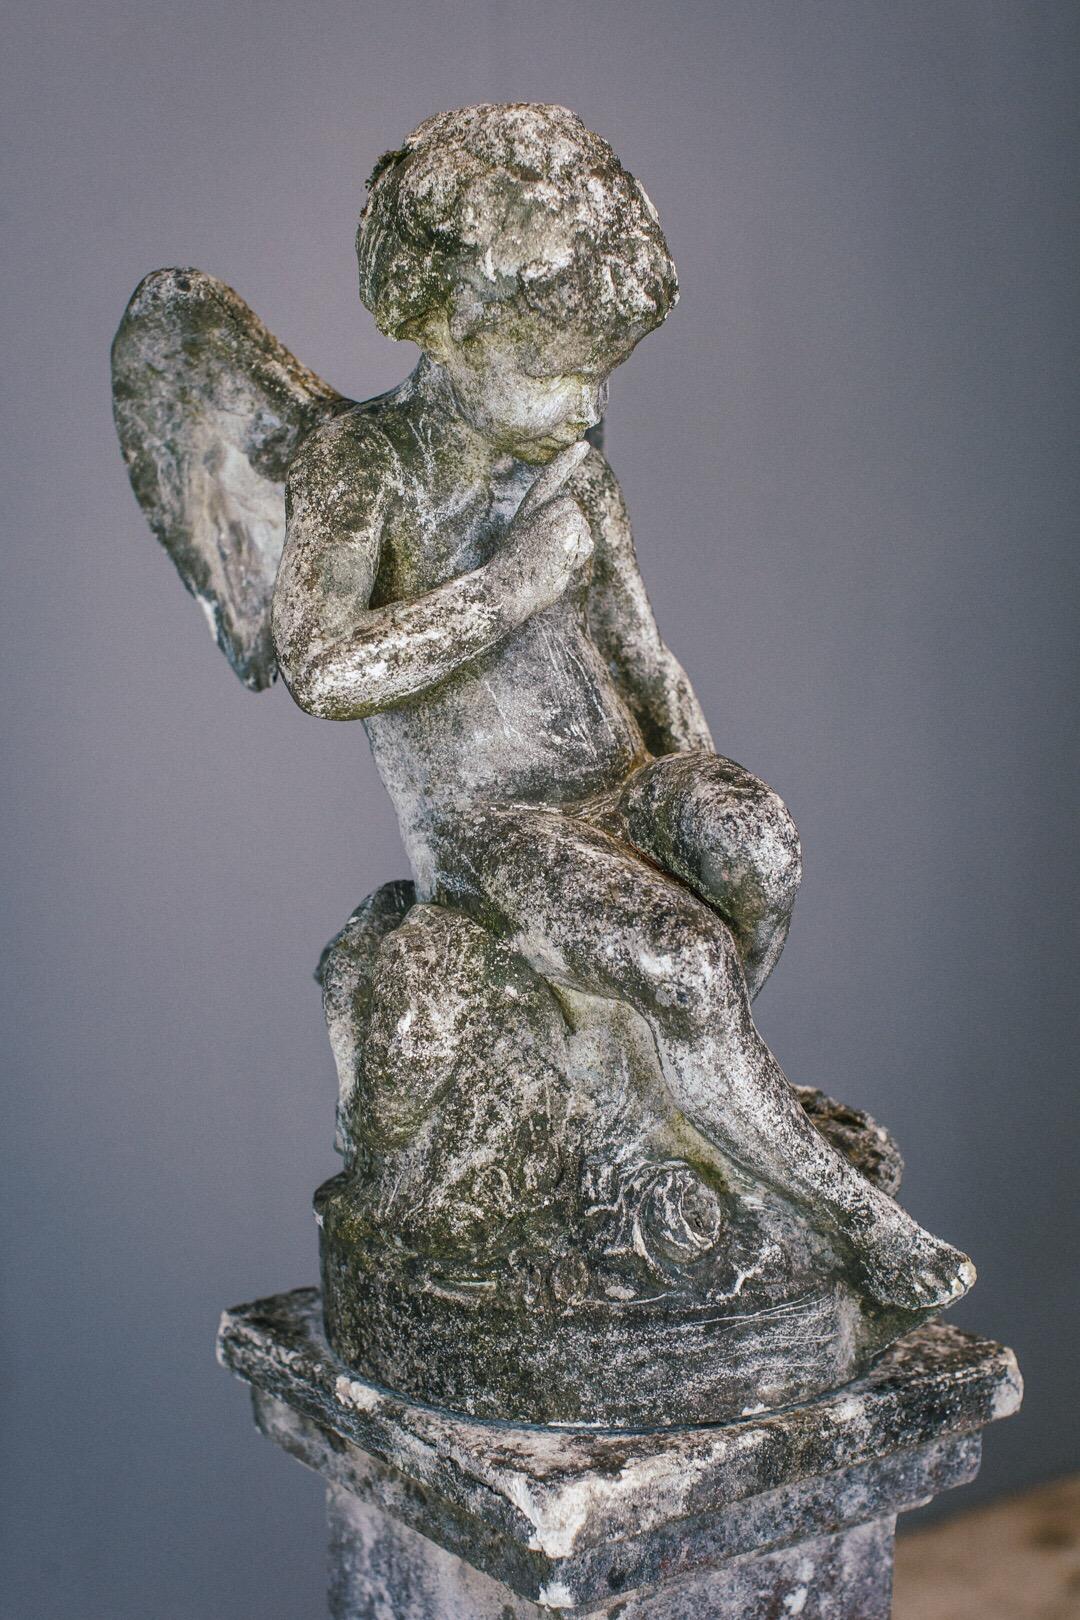 Weathered Angel statue and plinth. Wonderful patination and lichen growth. Composite.
          